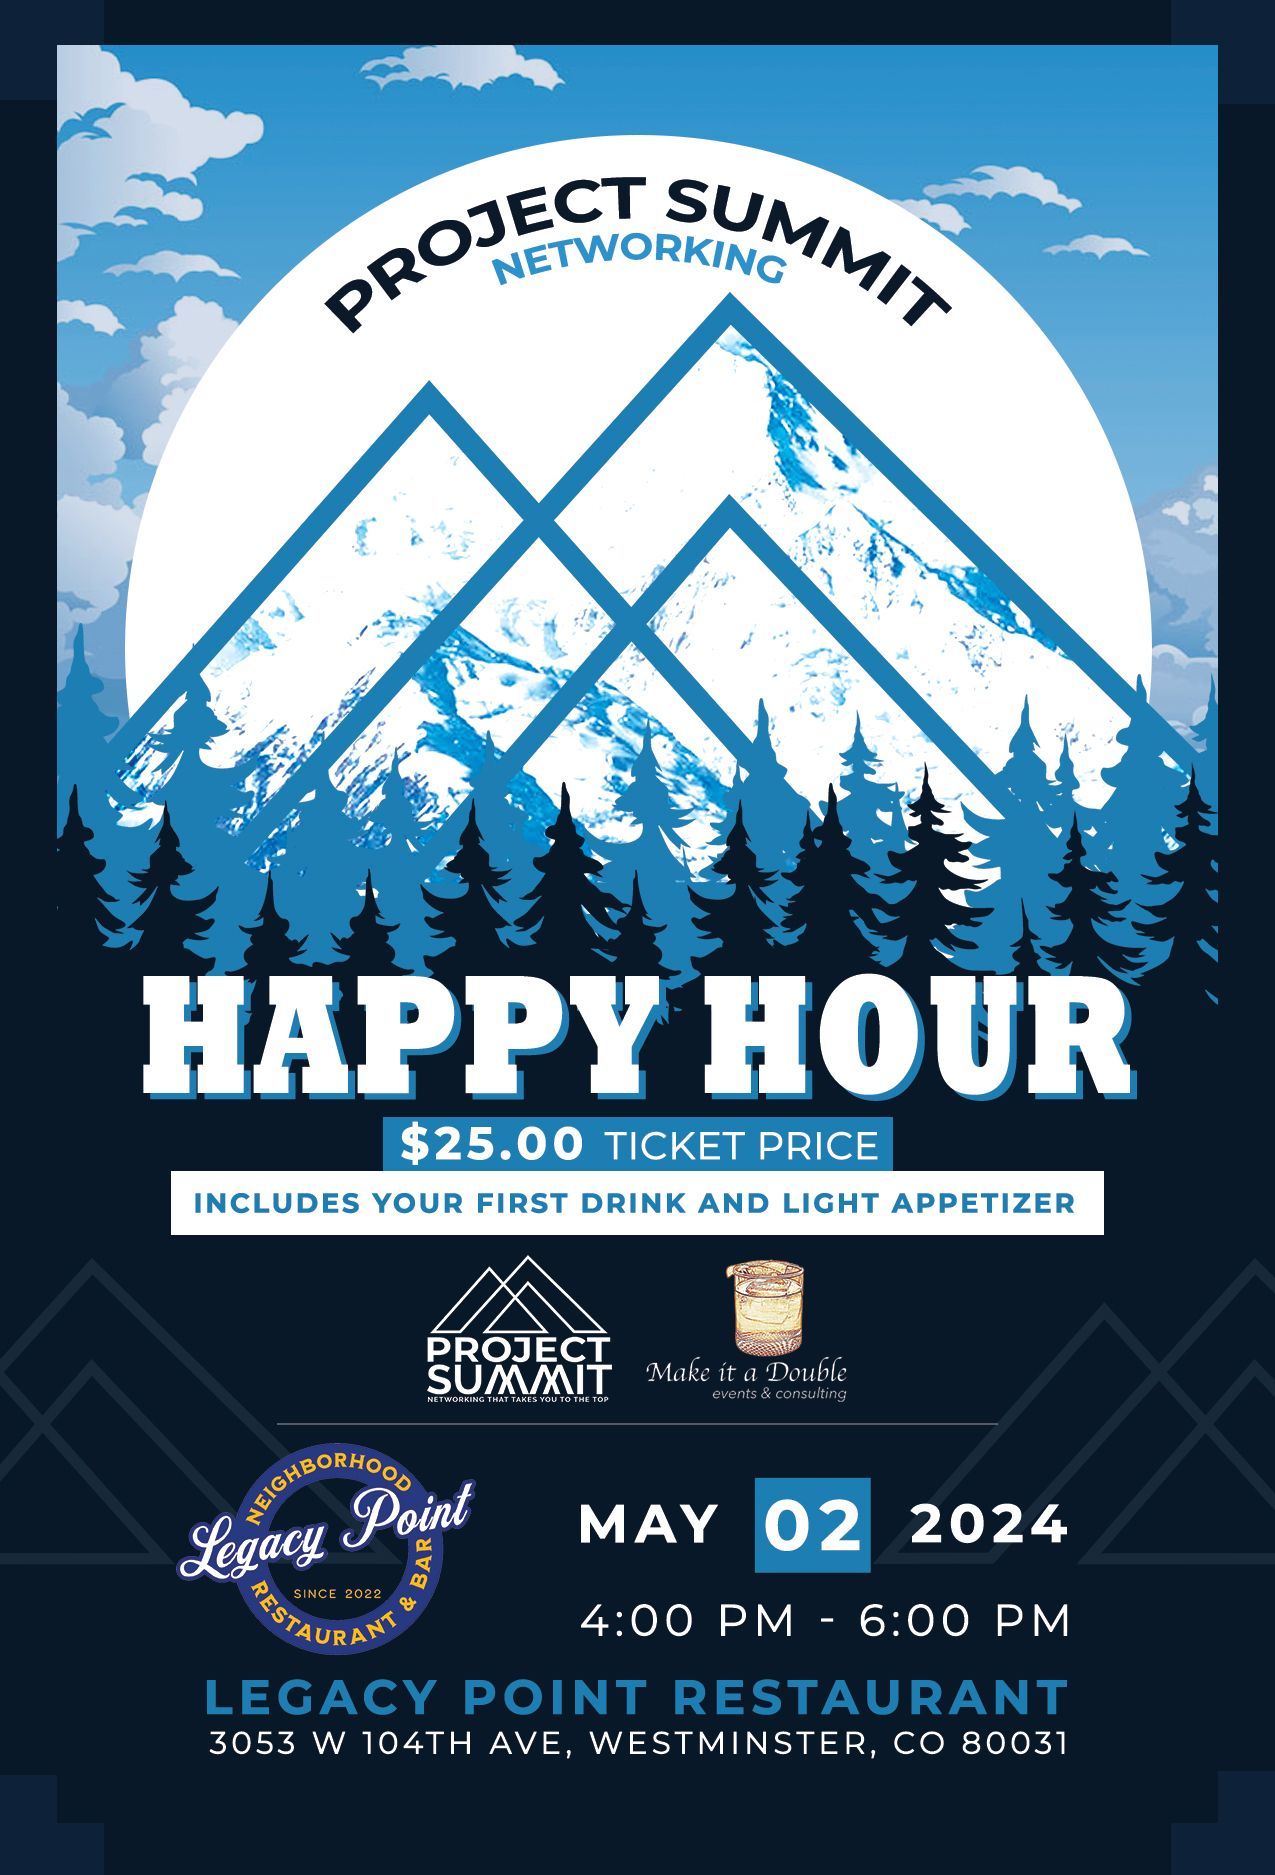 A poster for a happy hour at legacy point restaurant